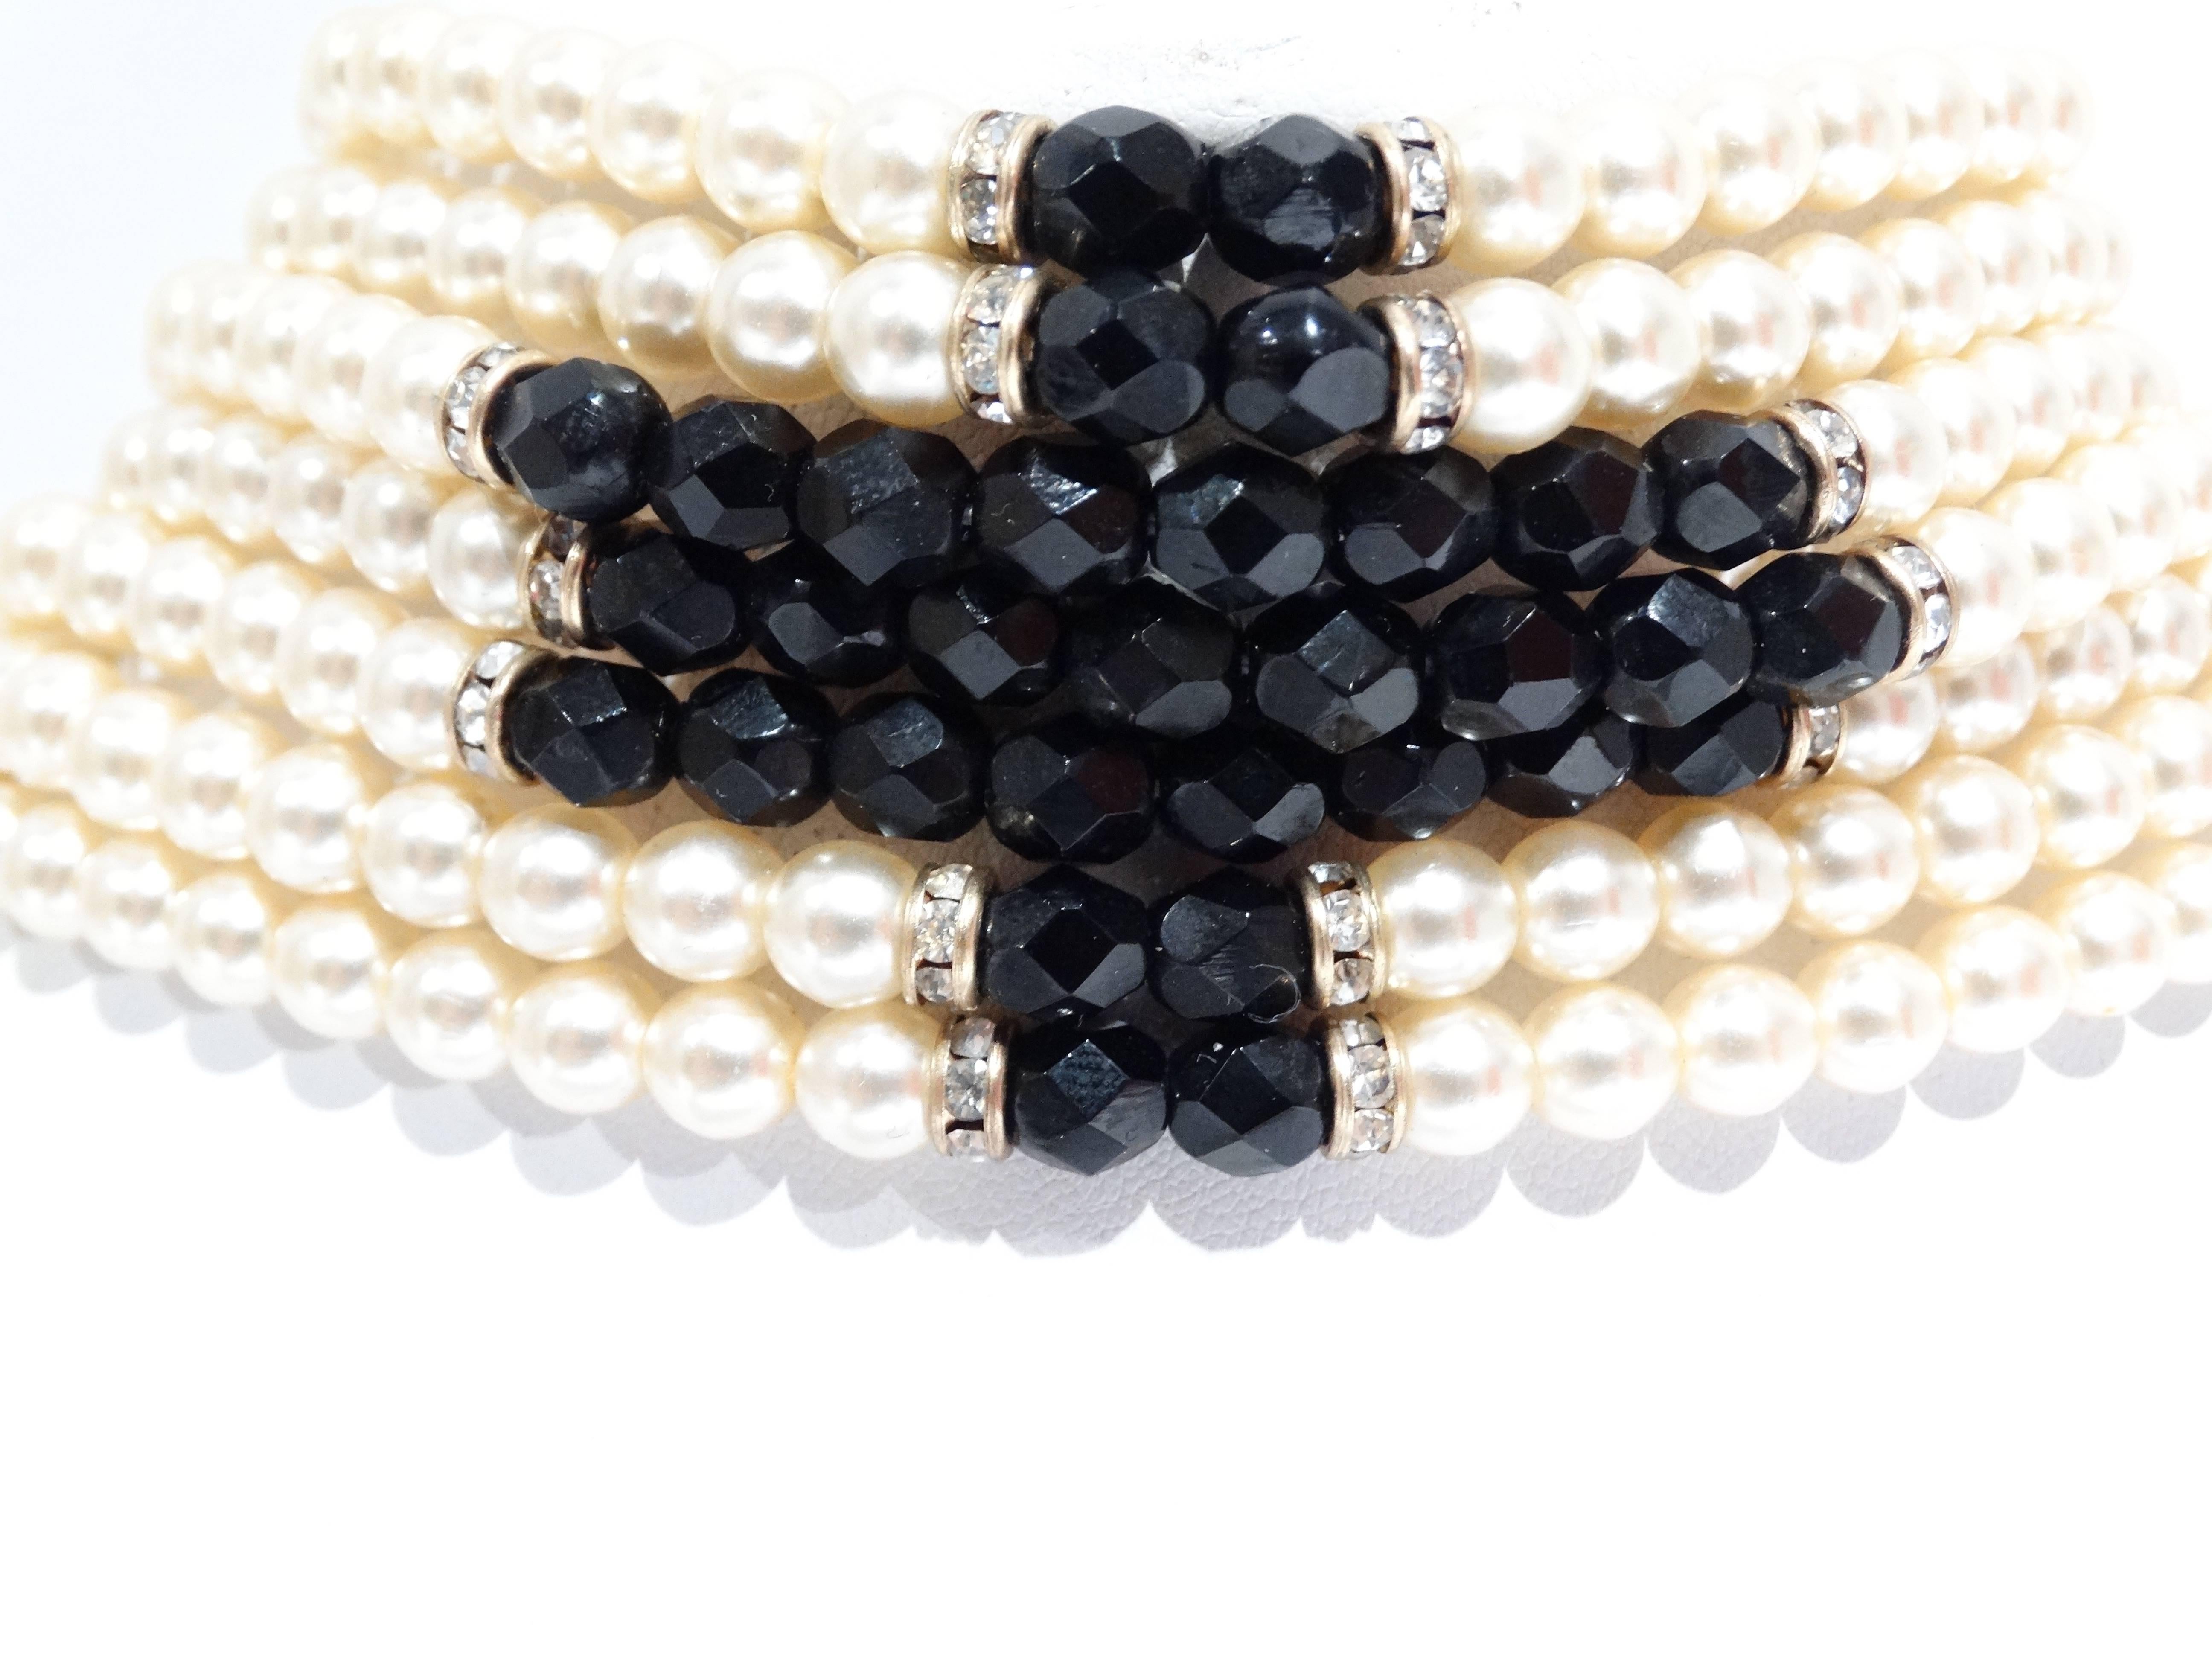 Stunning Akoya Cultured Pearl (ACP) choker necklace with Black Crystal Beads. This choker is a fabulous statement piece with hook closure, can be adjusted for size. Mint condition.
Measures 12.5